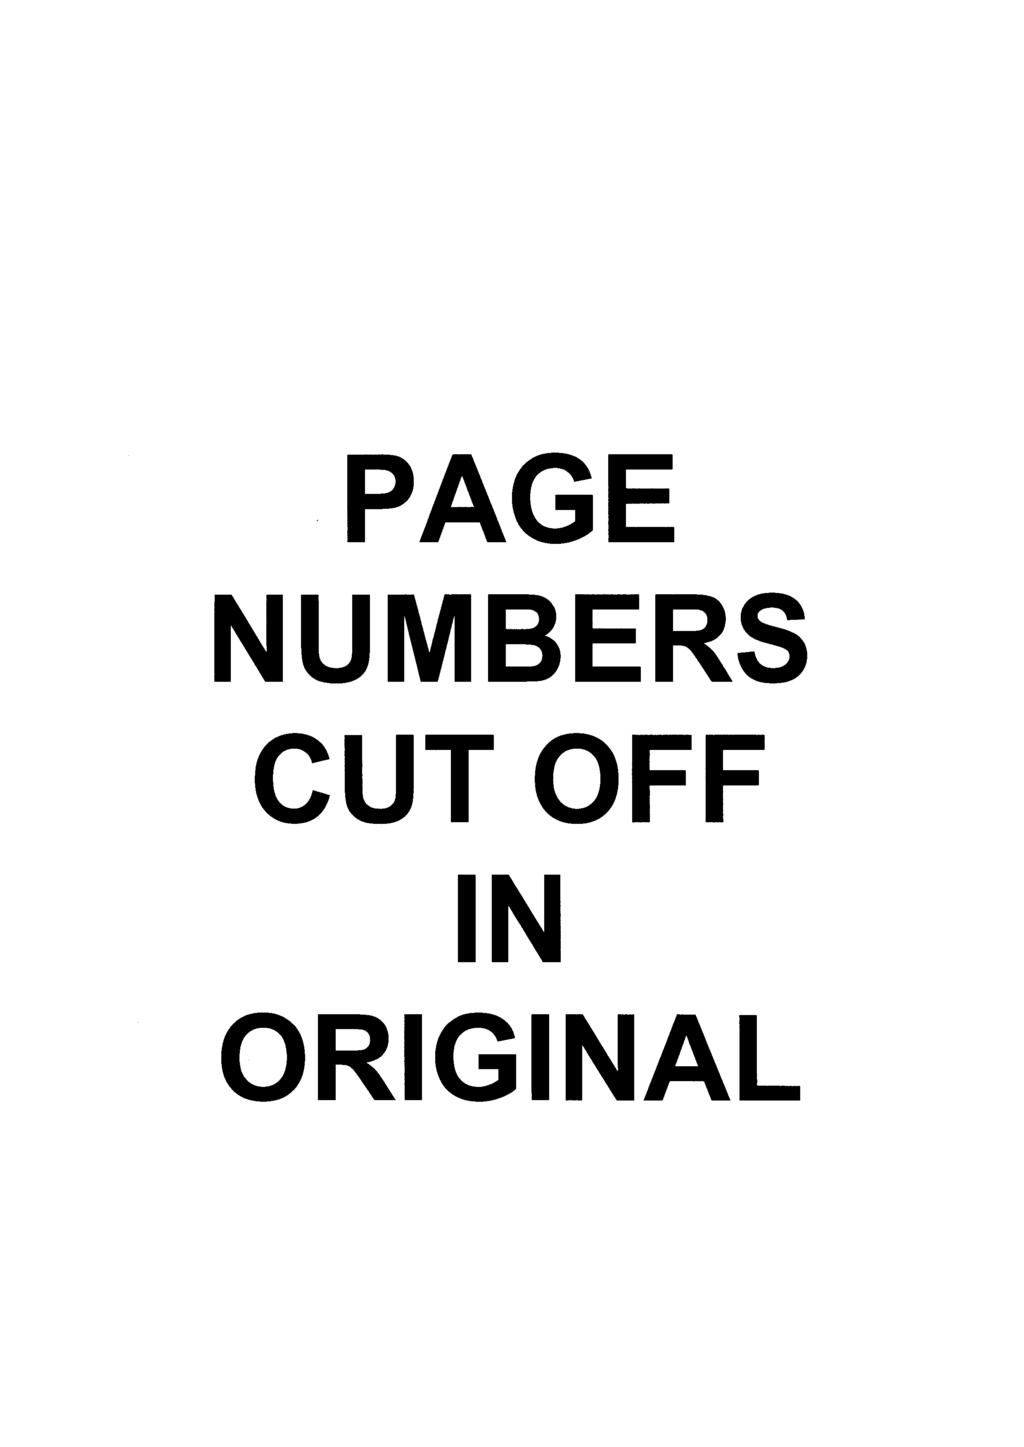 PAGE NUMBERS